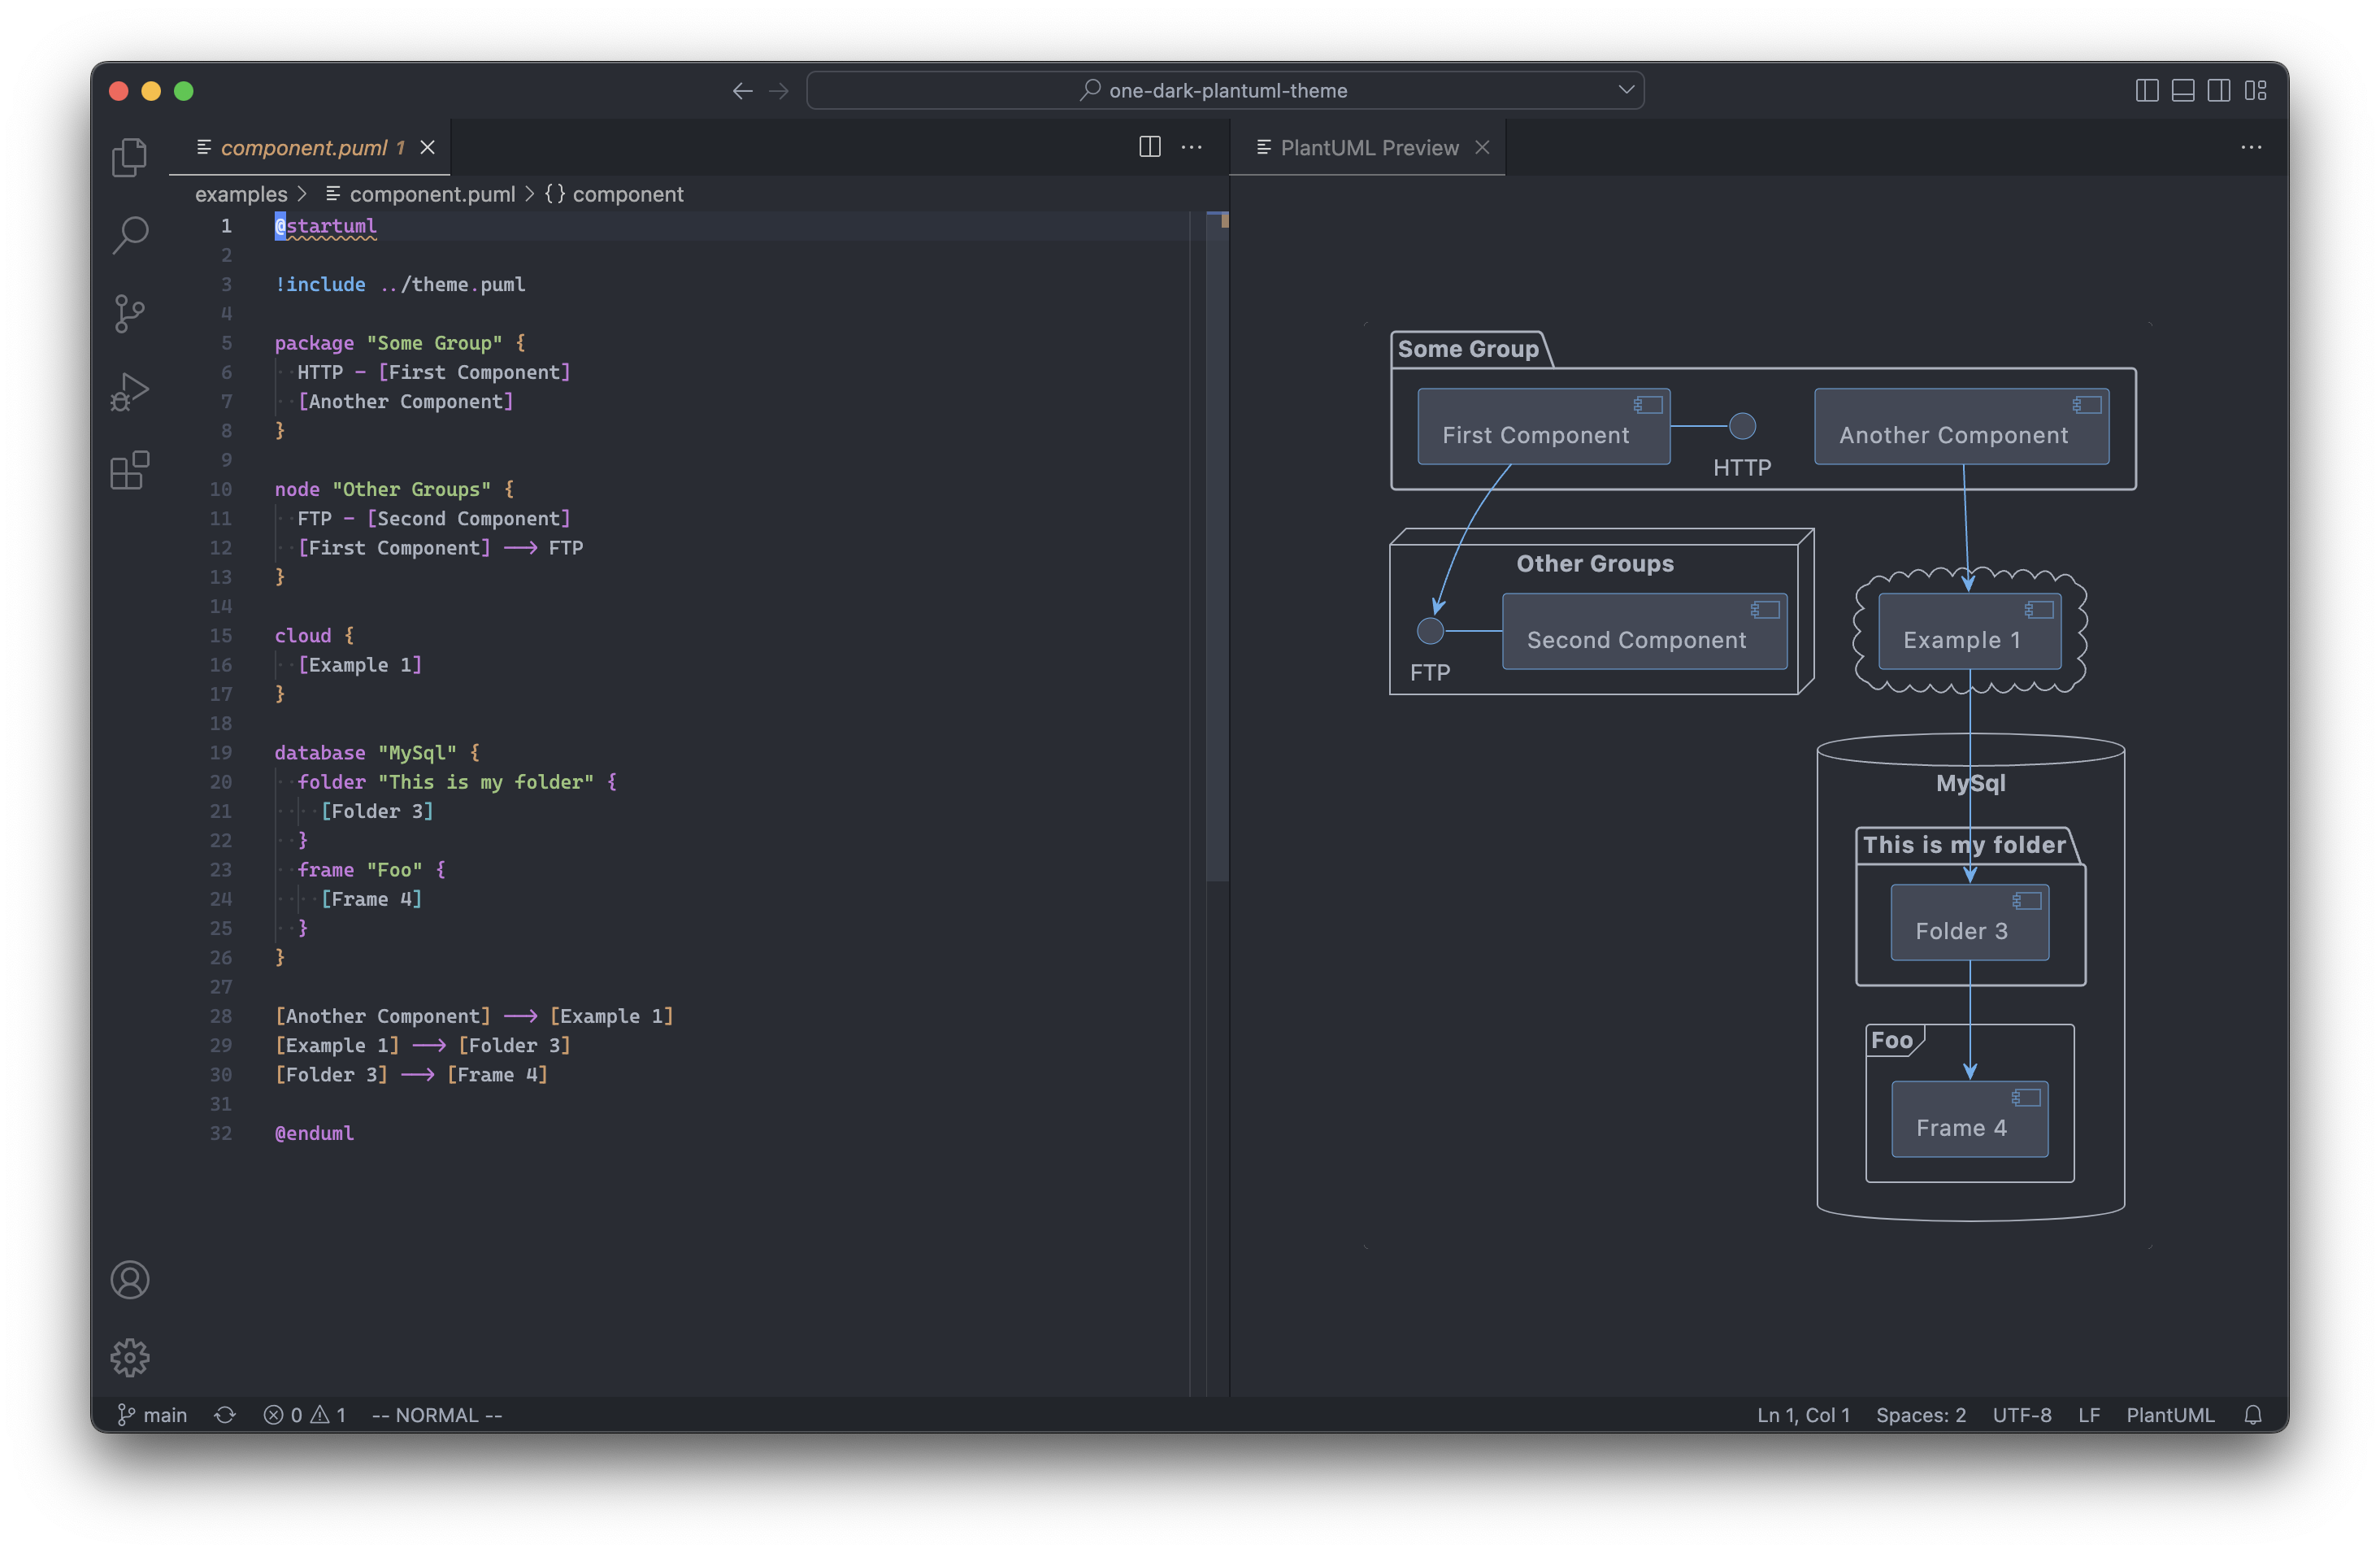 Screenshot of Visual Studio Code with PlantUML diagram code in left pane and diagram preview with One Dark PlantUML theme in right pane